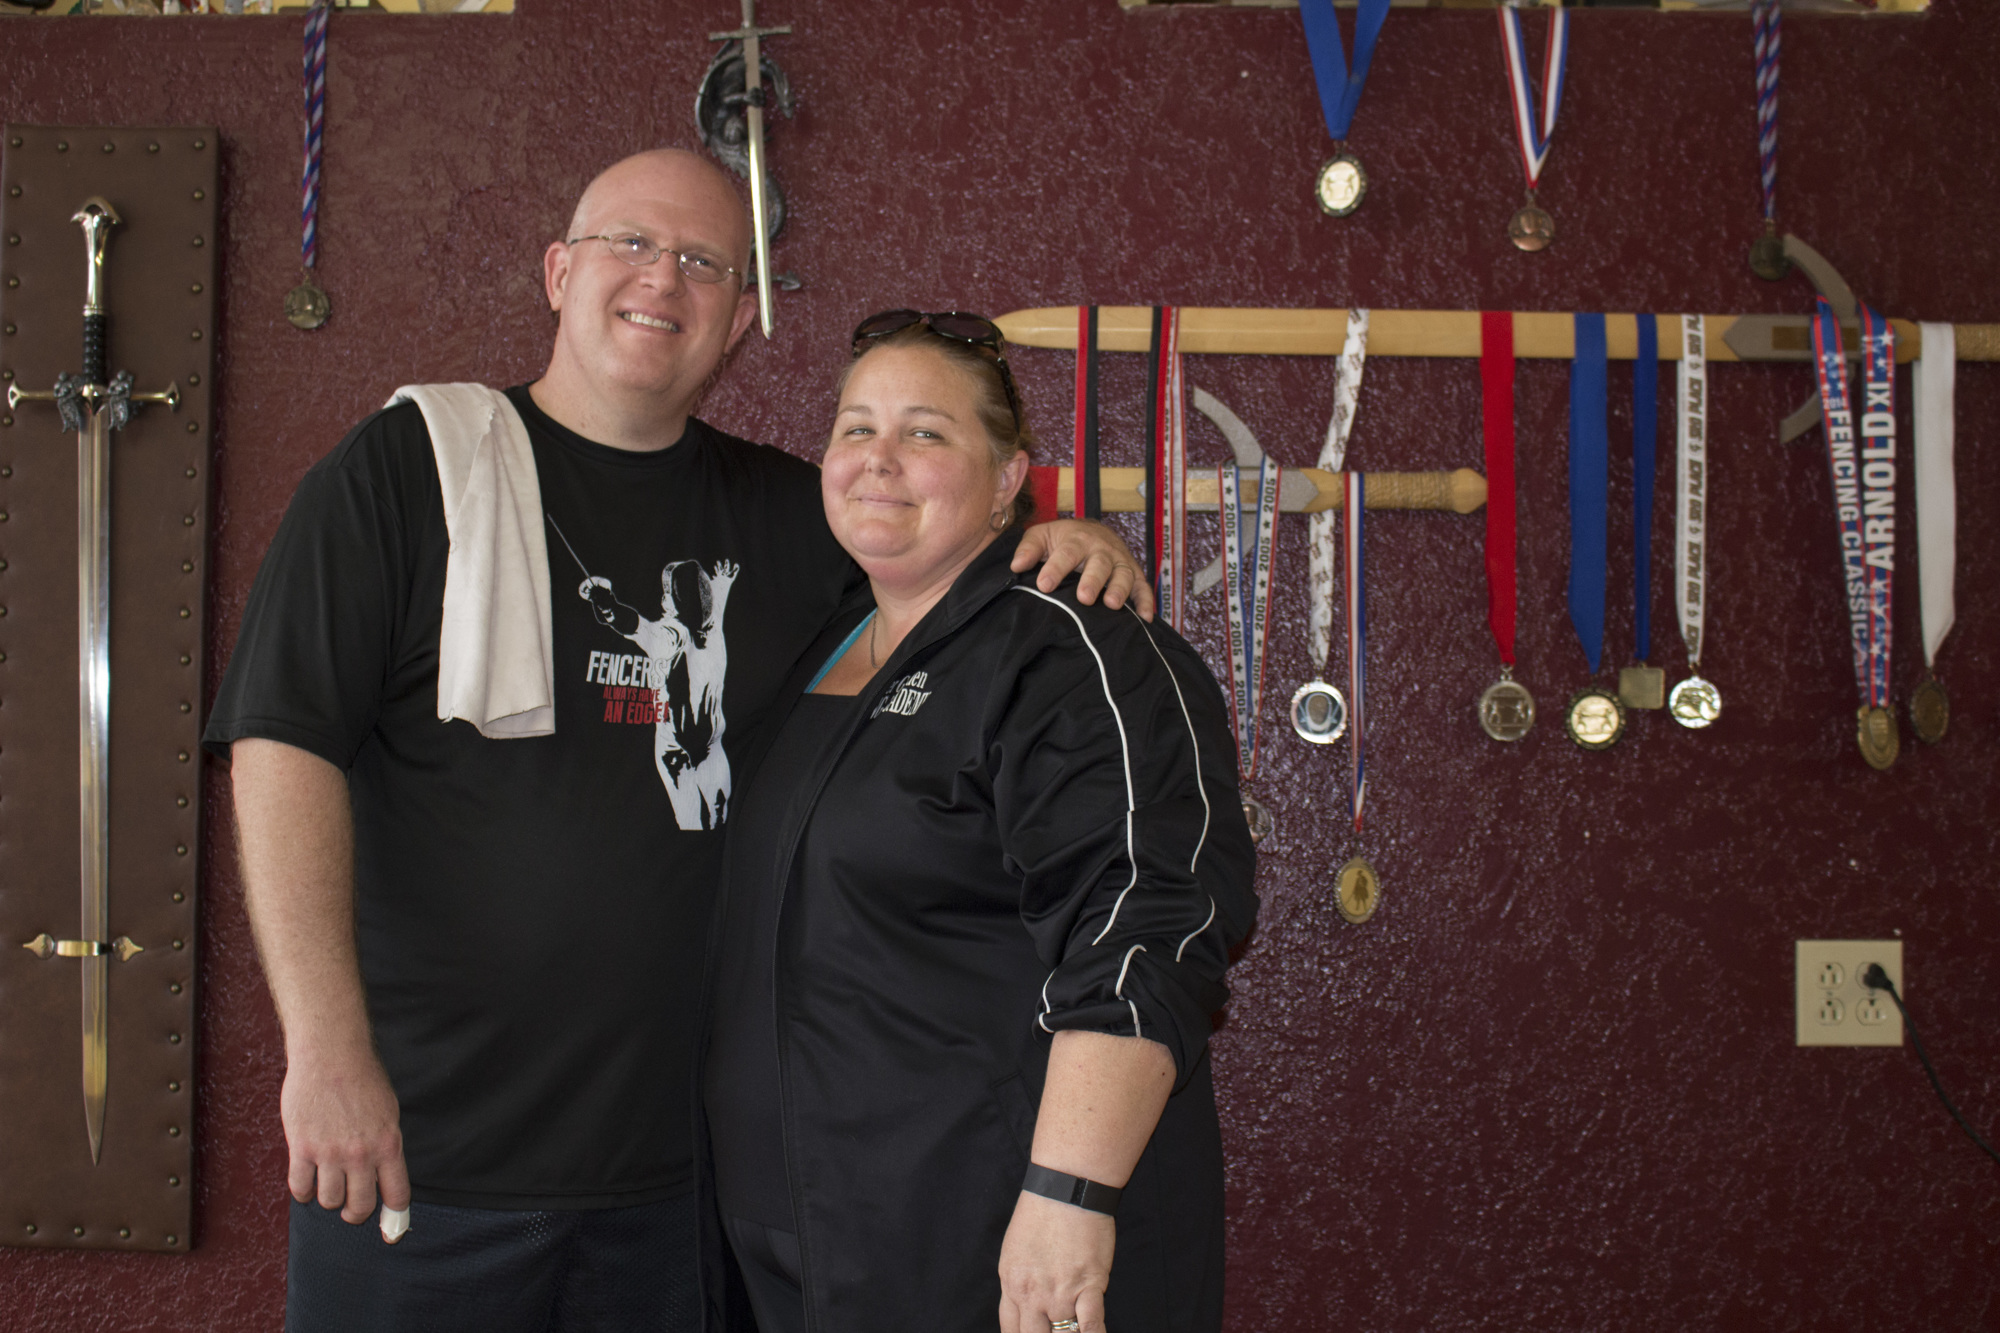 Jason and Jennifer Seachrist are the owners of Winter Garden Fencing Academy.